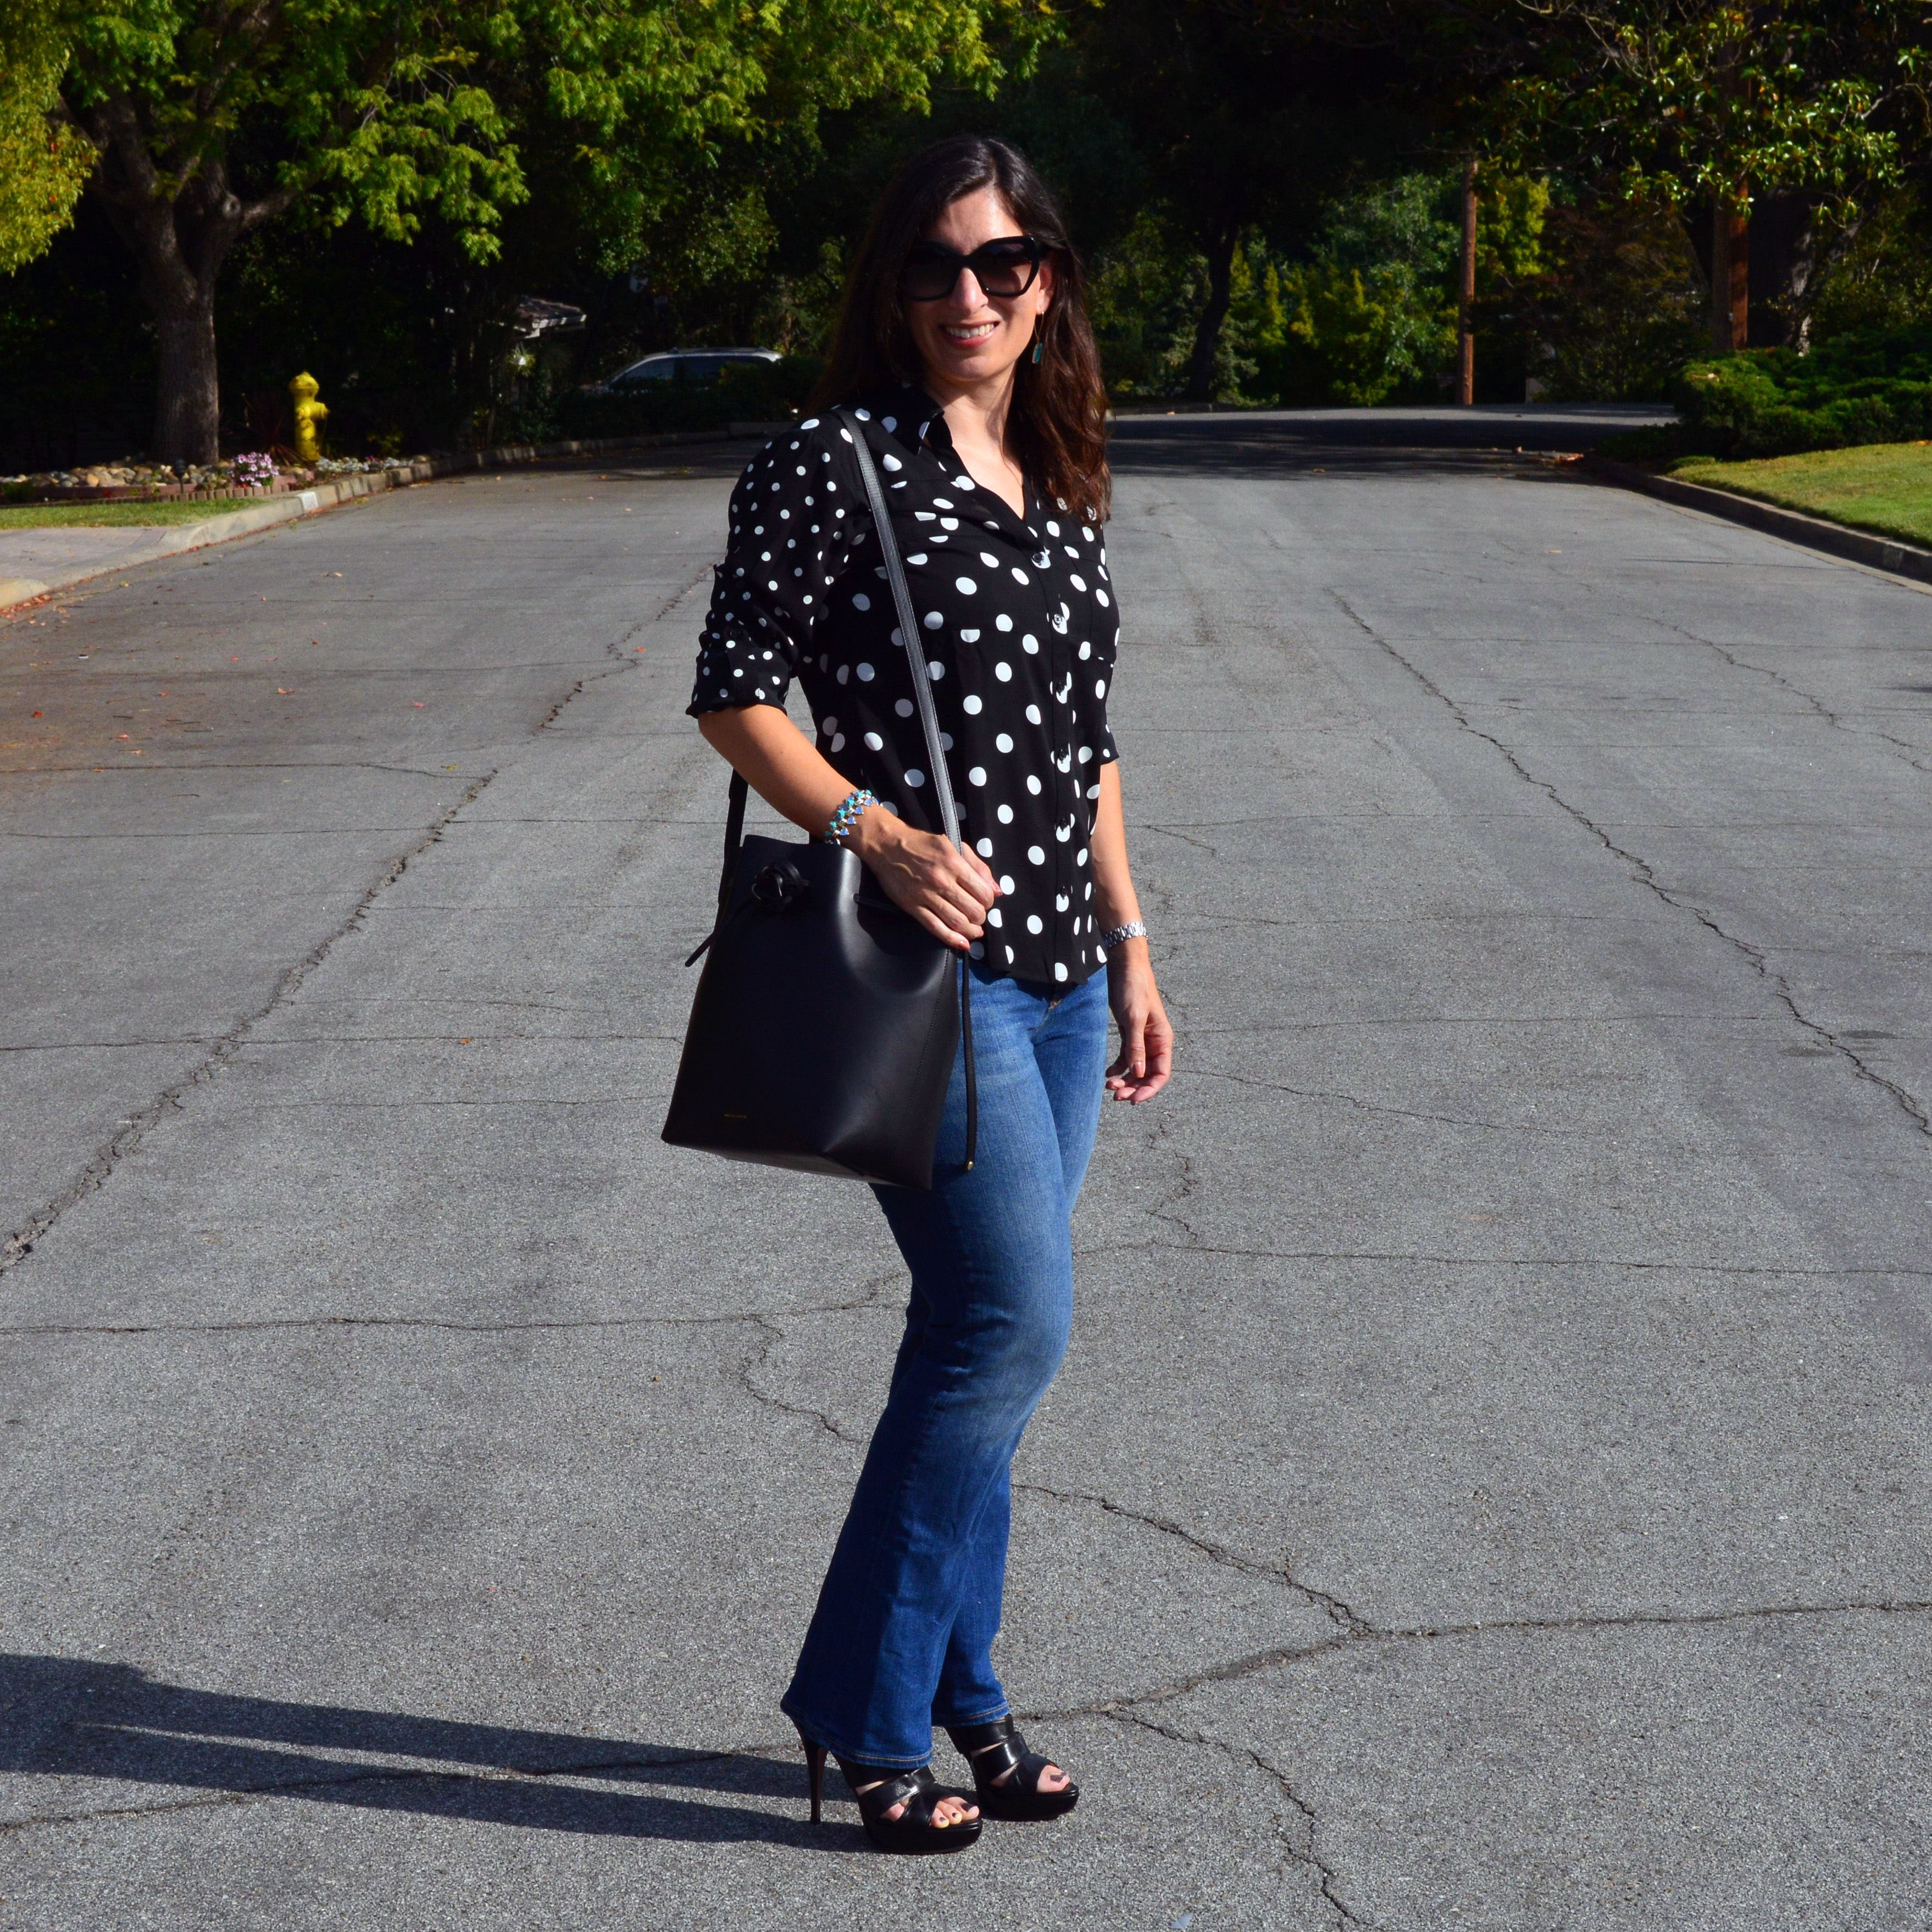 Flare jeans and platforms | Bay Area Fashionista